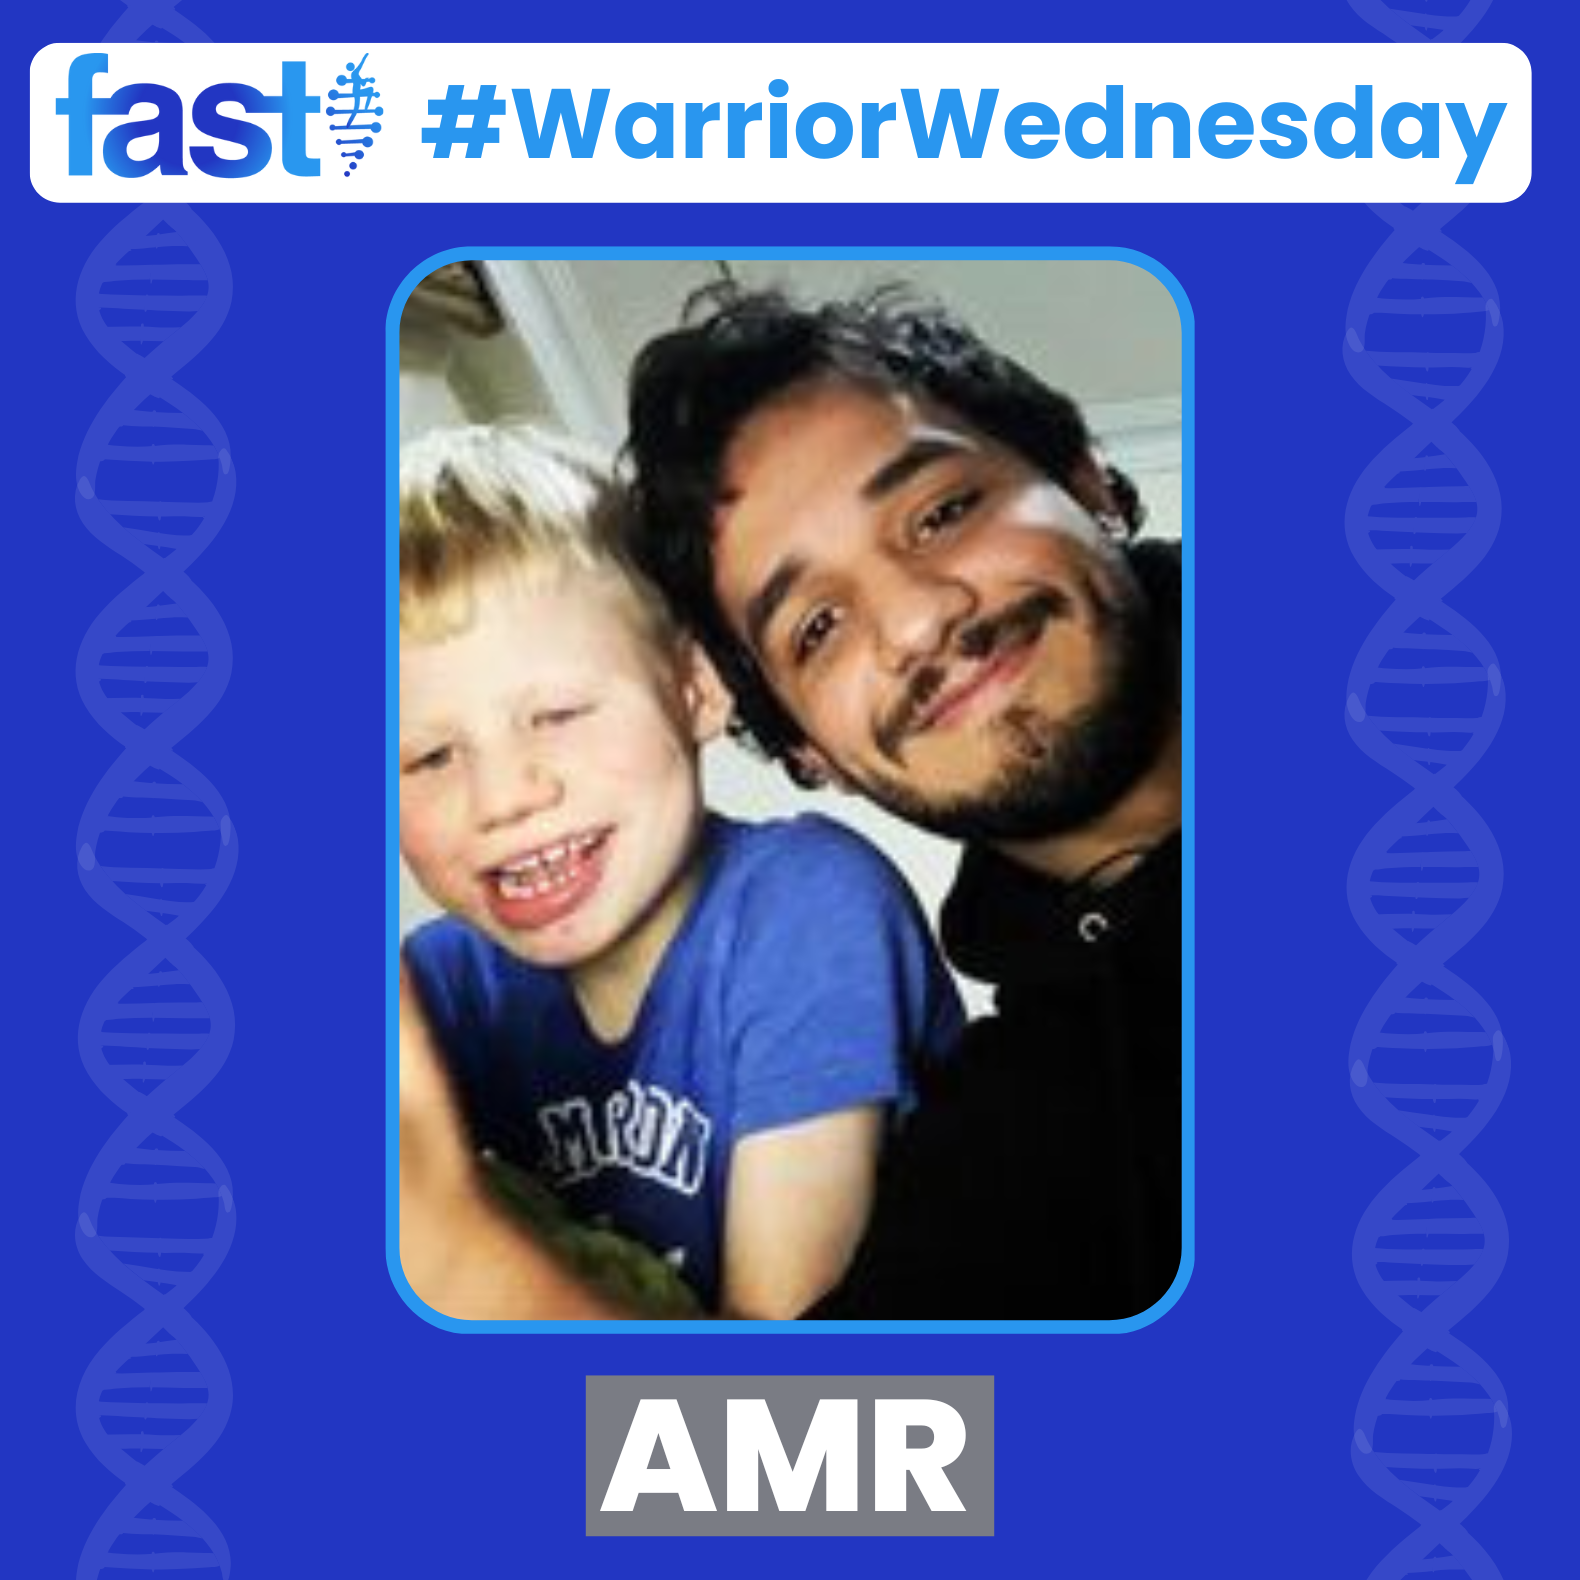 FAST Warrior Wednesday: Amr. Amr smiles at the camera alongside Orion.